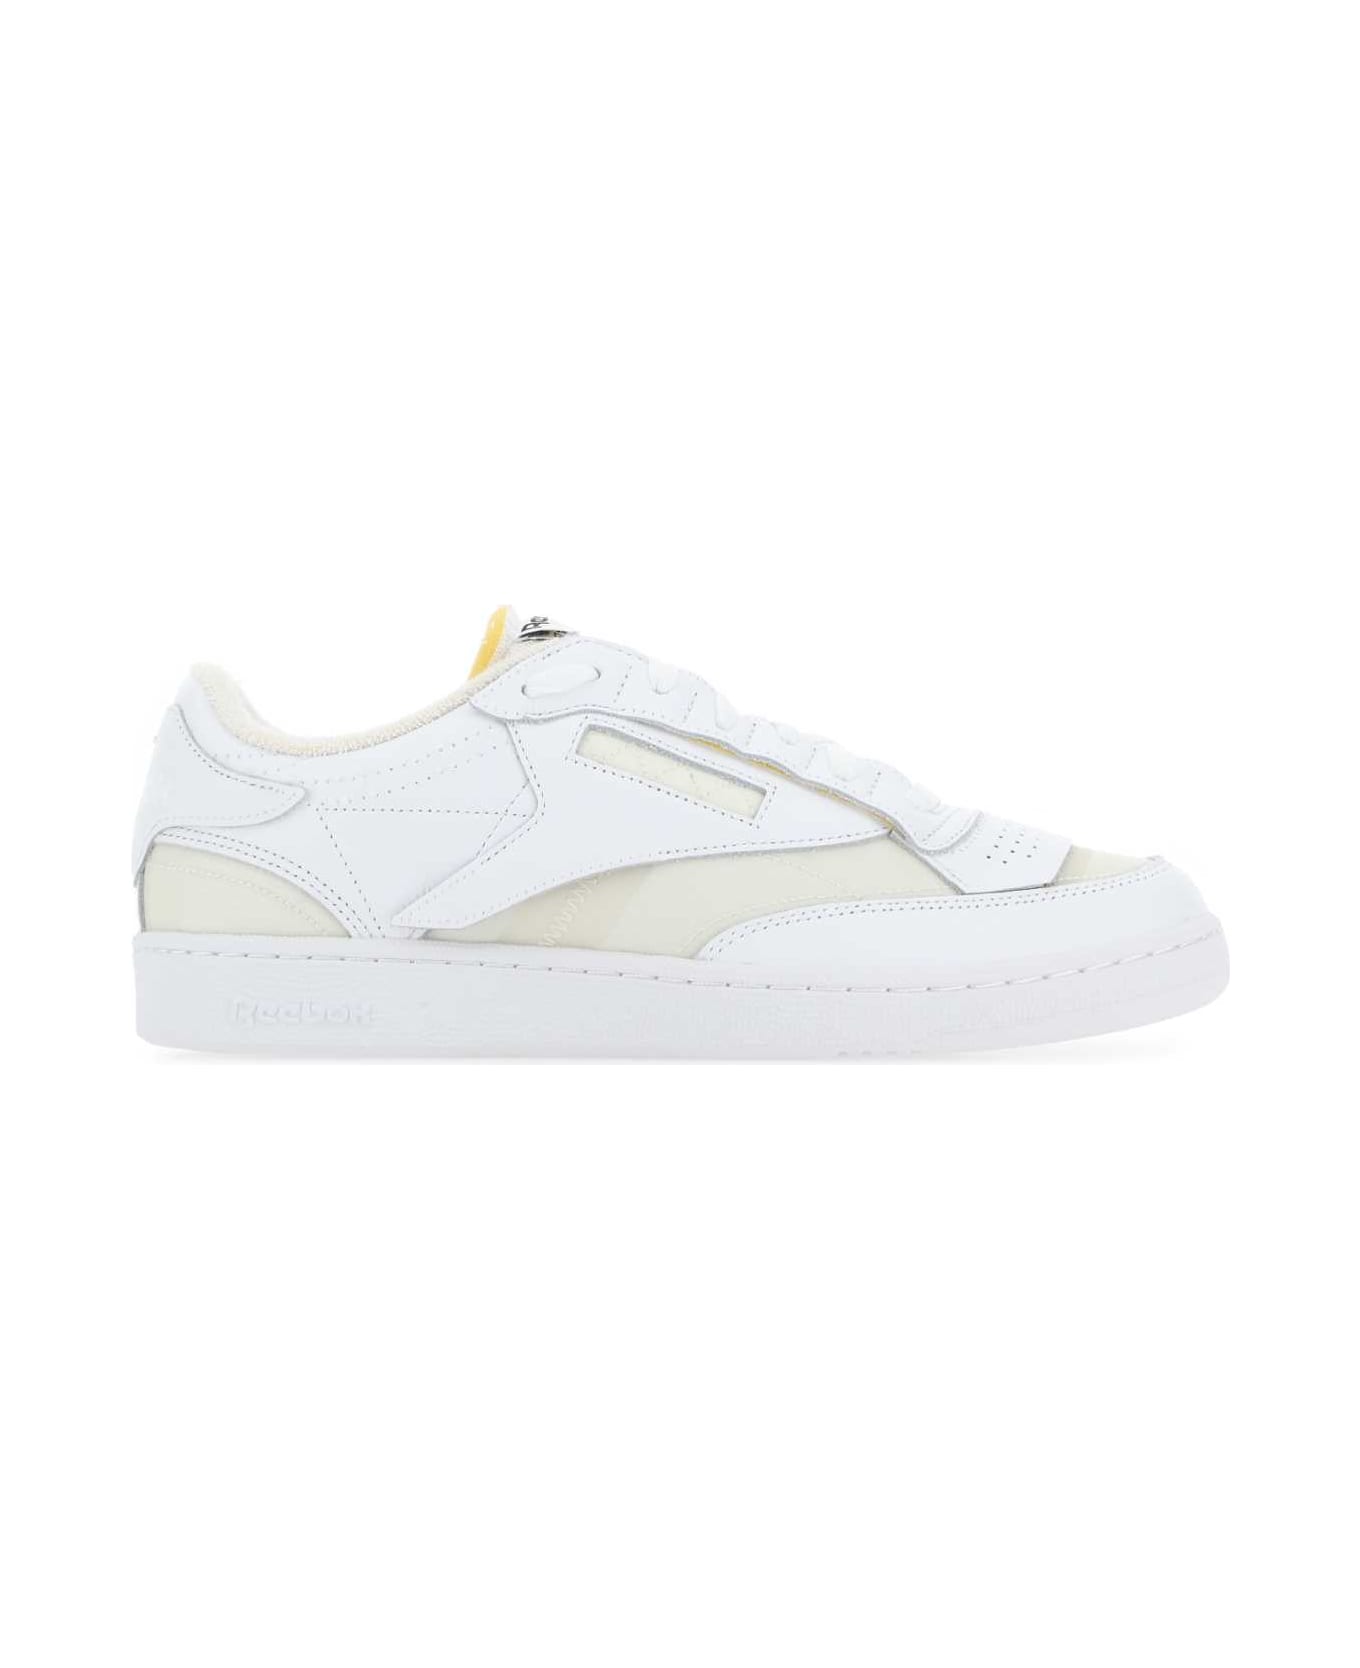 Reebok White Leather And Fabric Project 0 Cc Memory Of V2 Sneakers - T1003